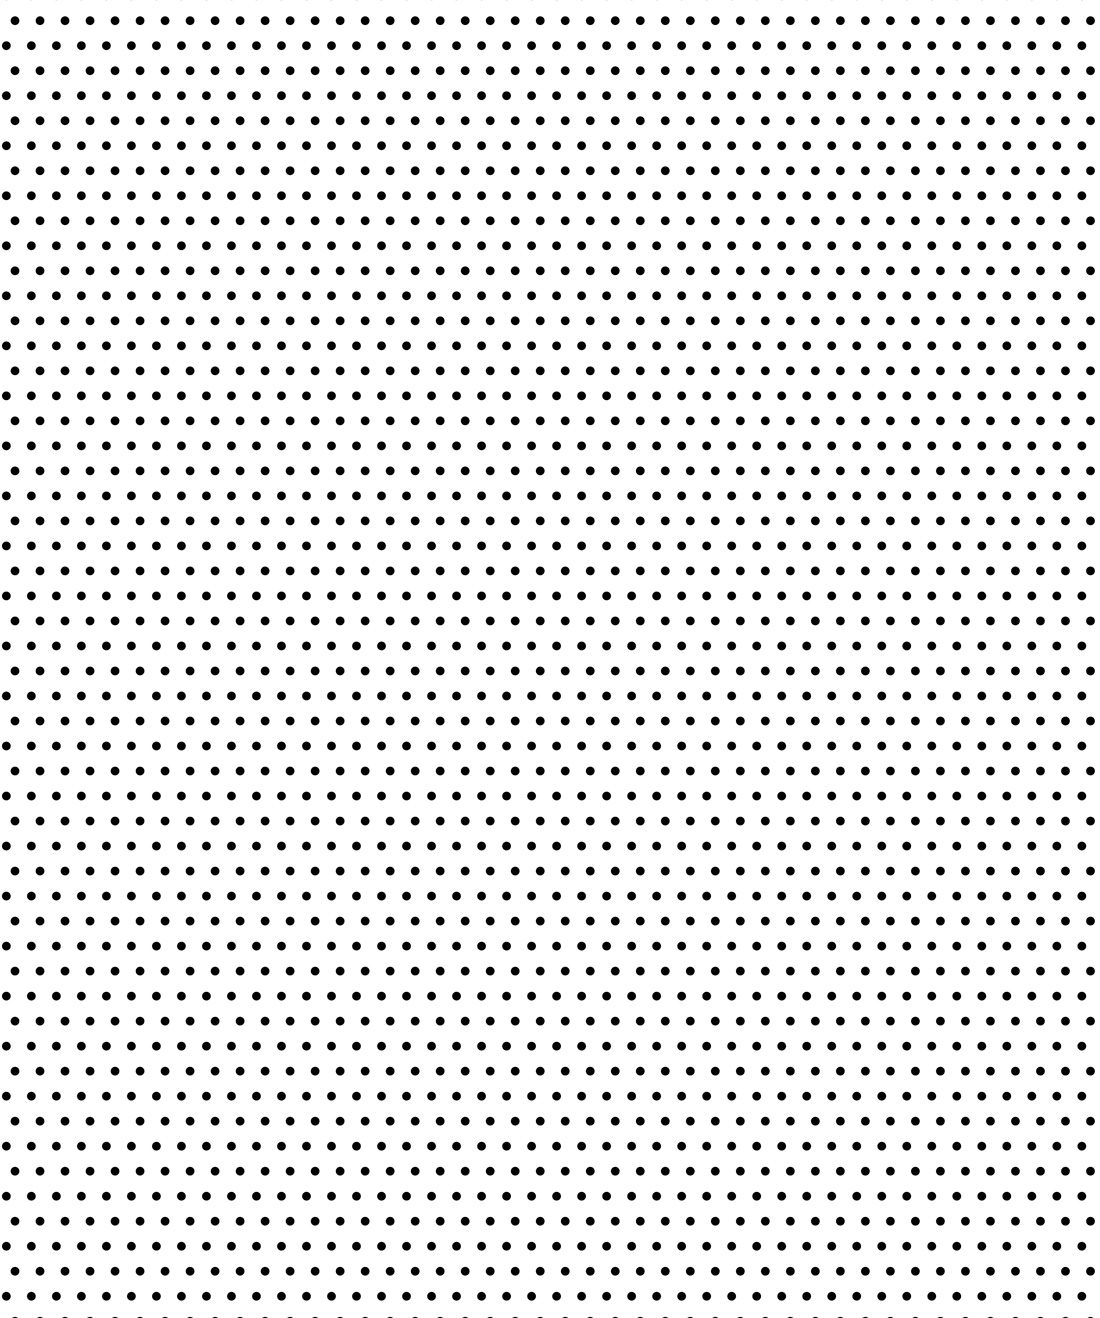 All dotty about your dots? The benefits of dotted pages — designist